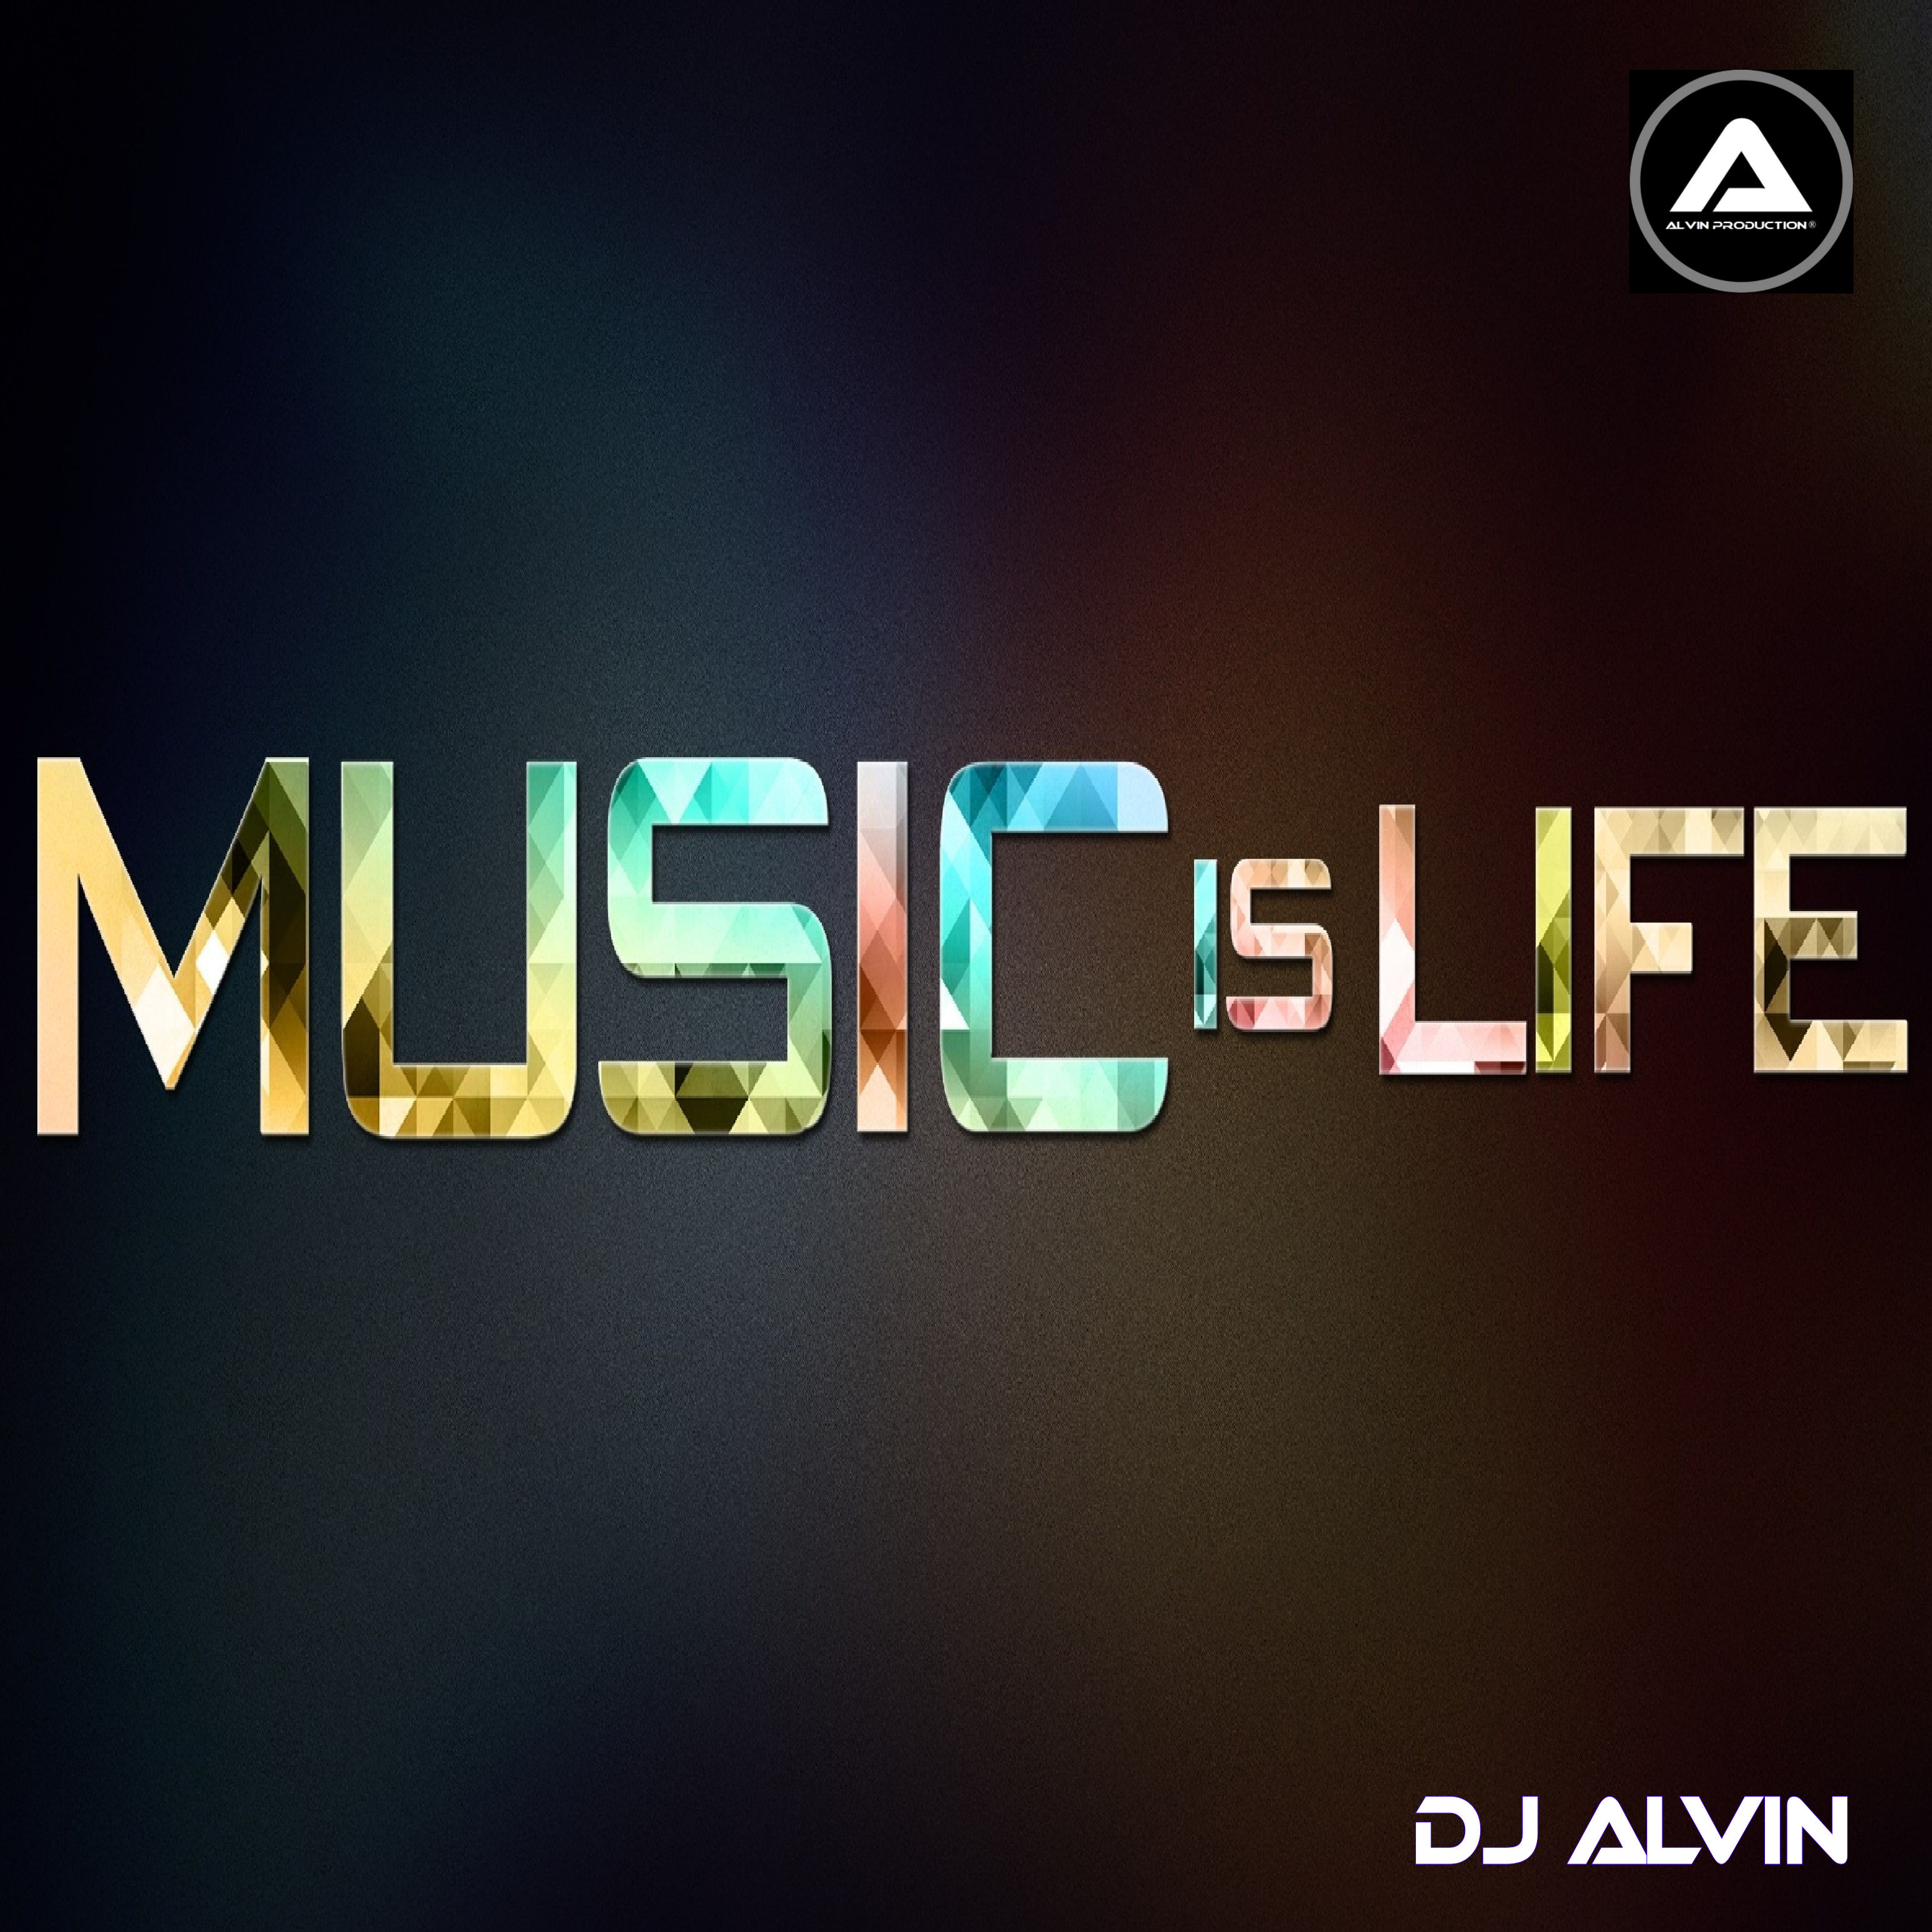 ★ Music is life ★ 